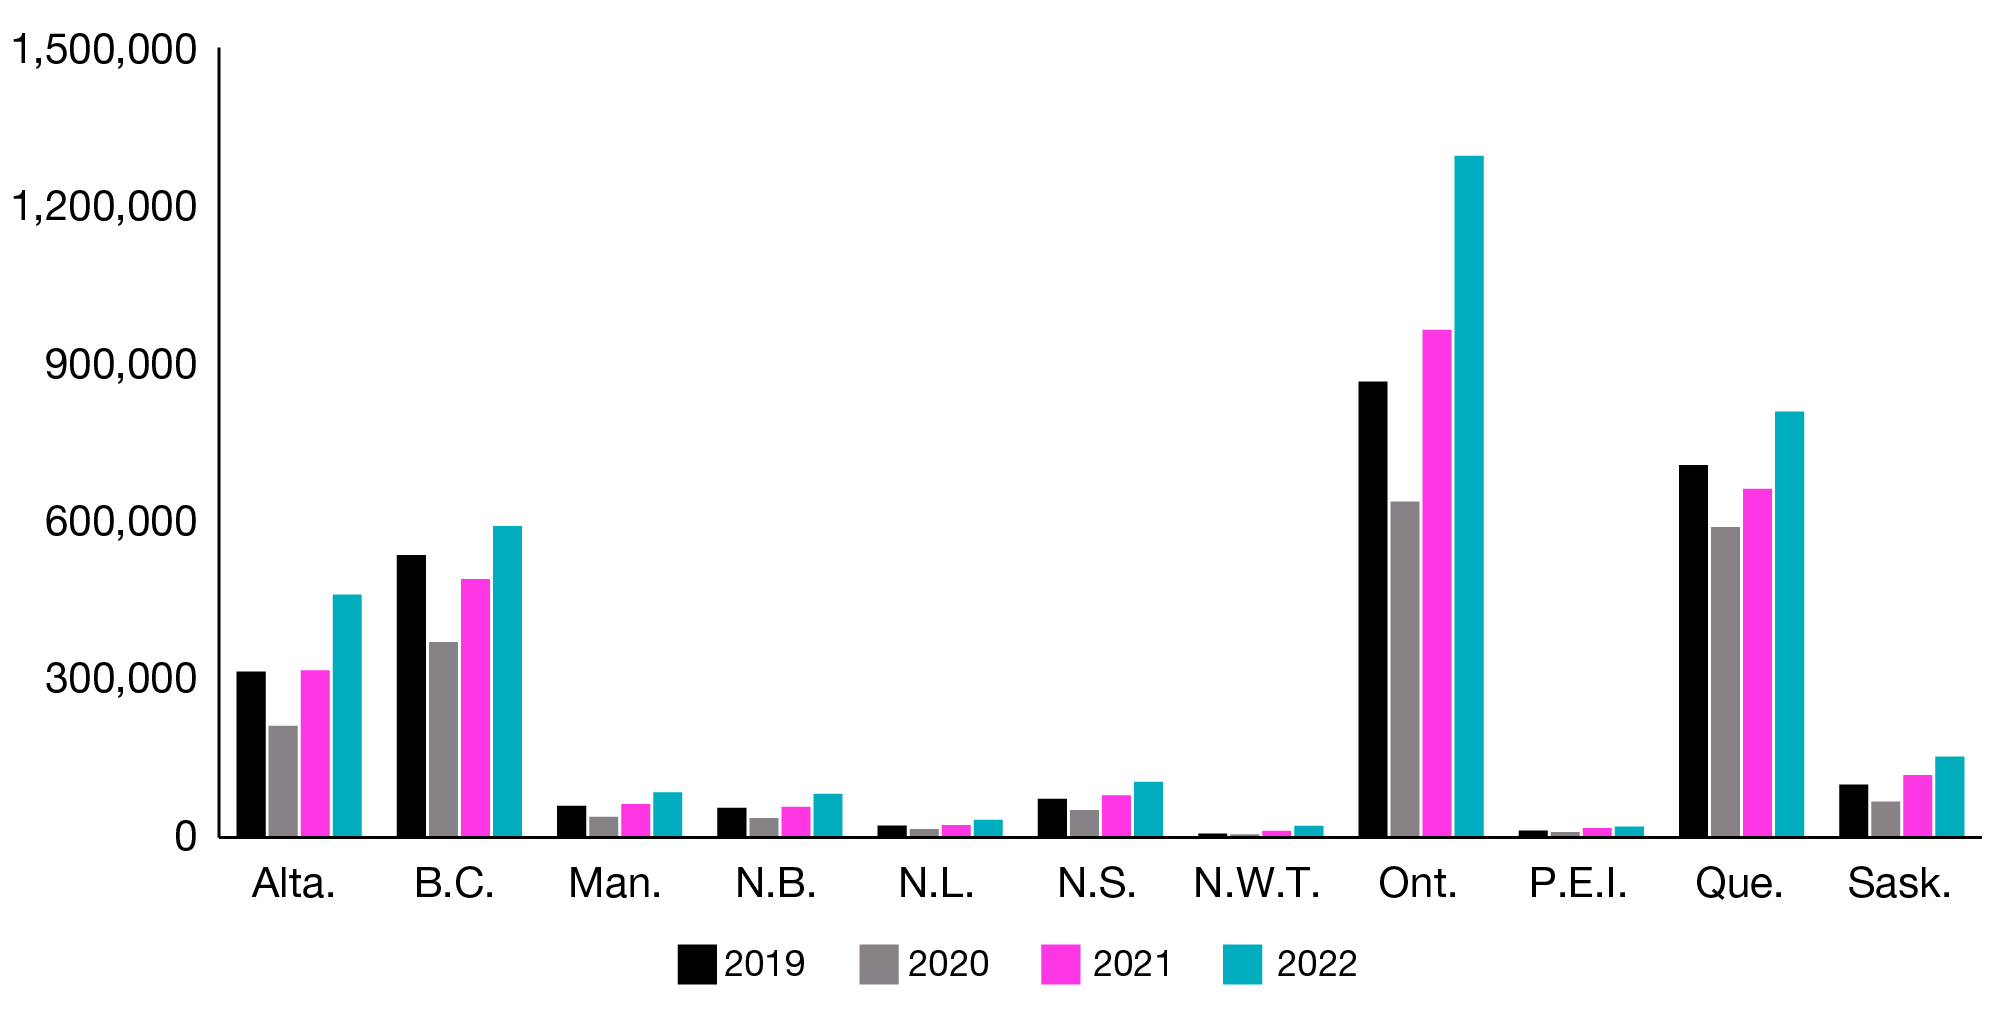 A column chart comparing the number of job postings between 2019 and 2022 across provinces. Job postings were higher in 2022 than in any other year for all the provinces.